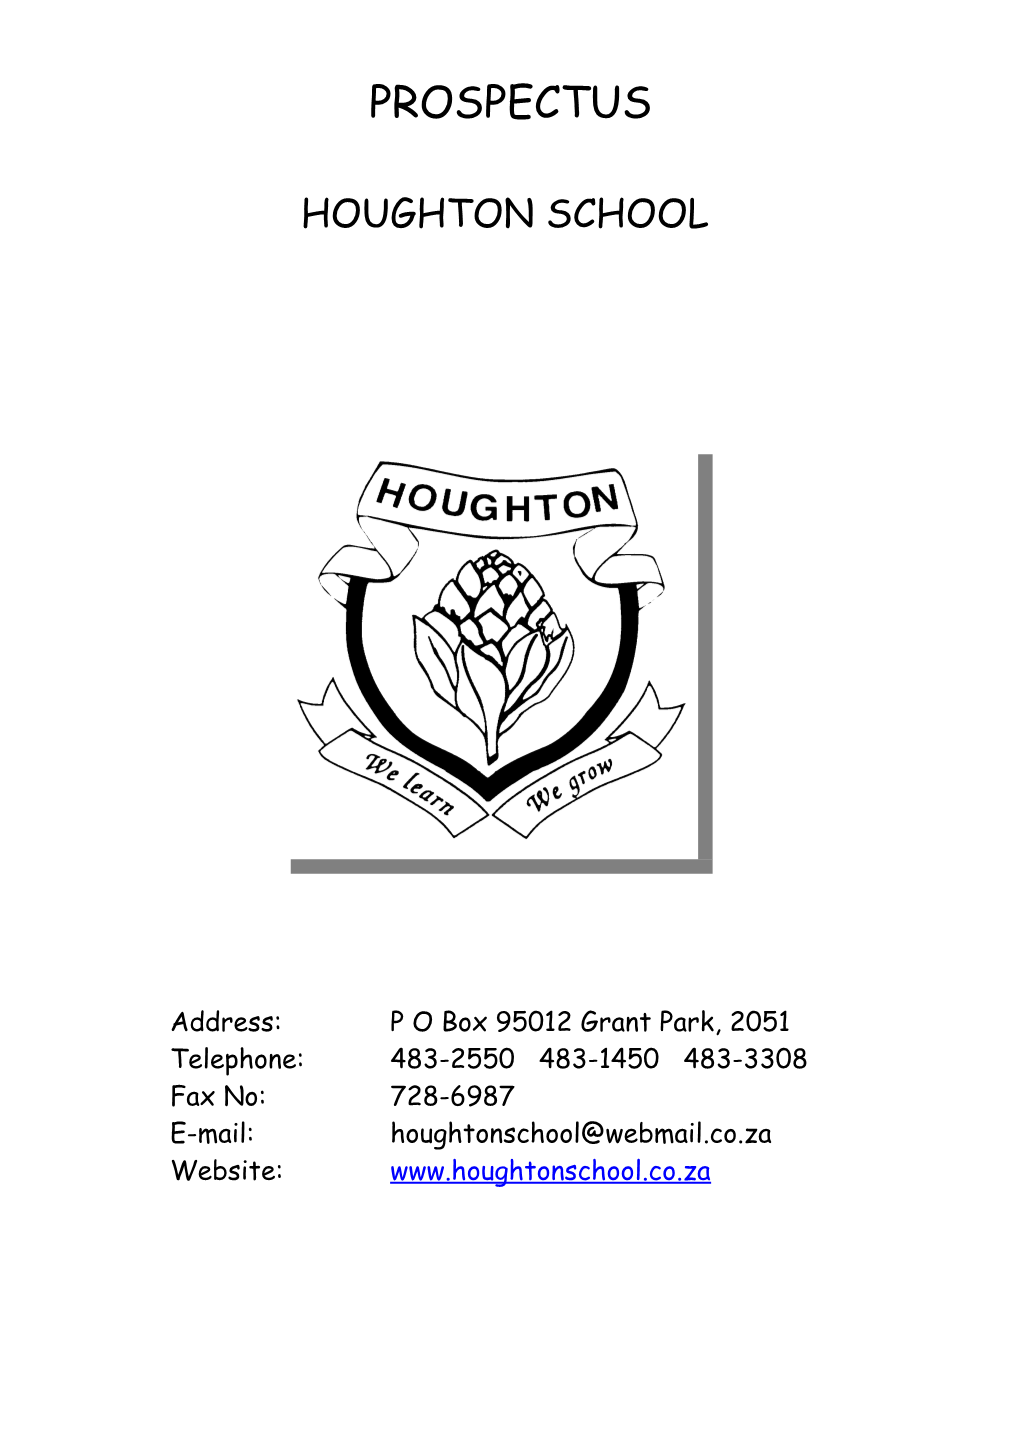 My Staff and I Bid Your Child a Very Warm WELCOME to HOUGHTON SCHOOL